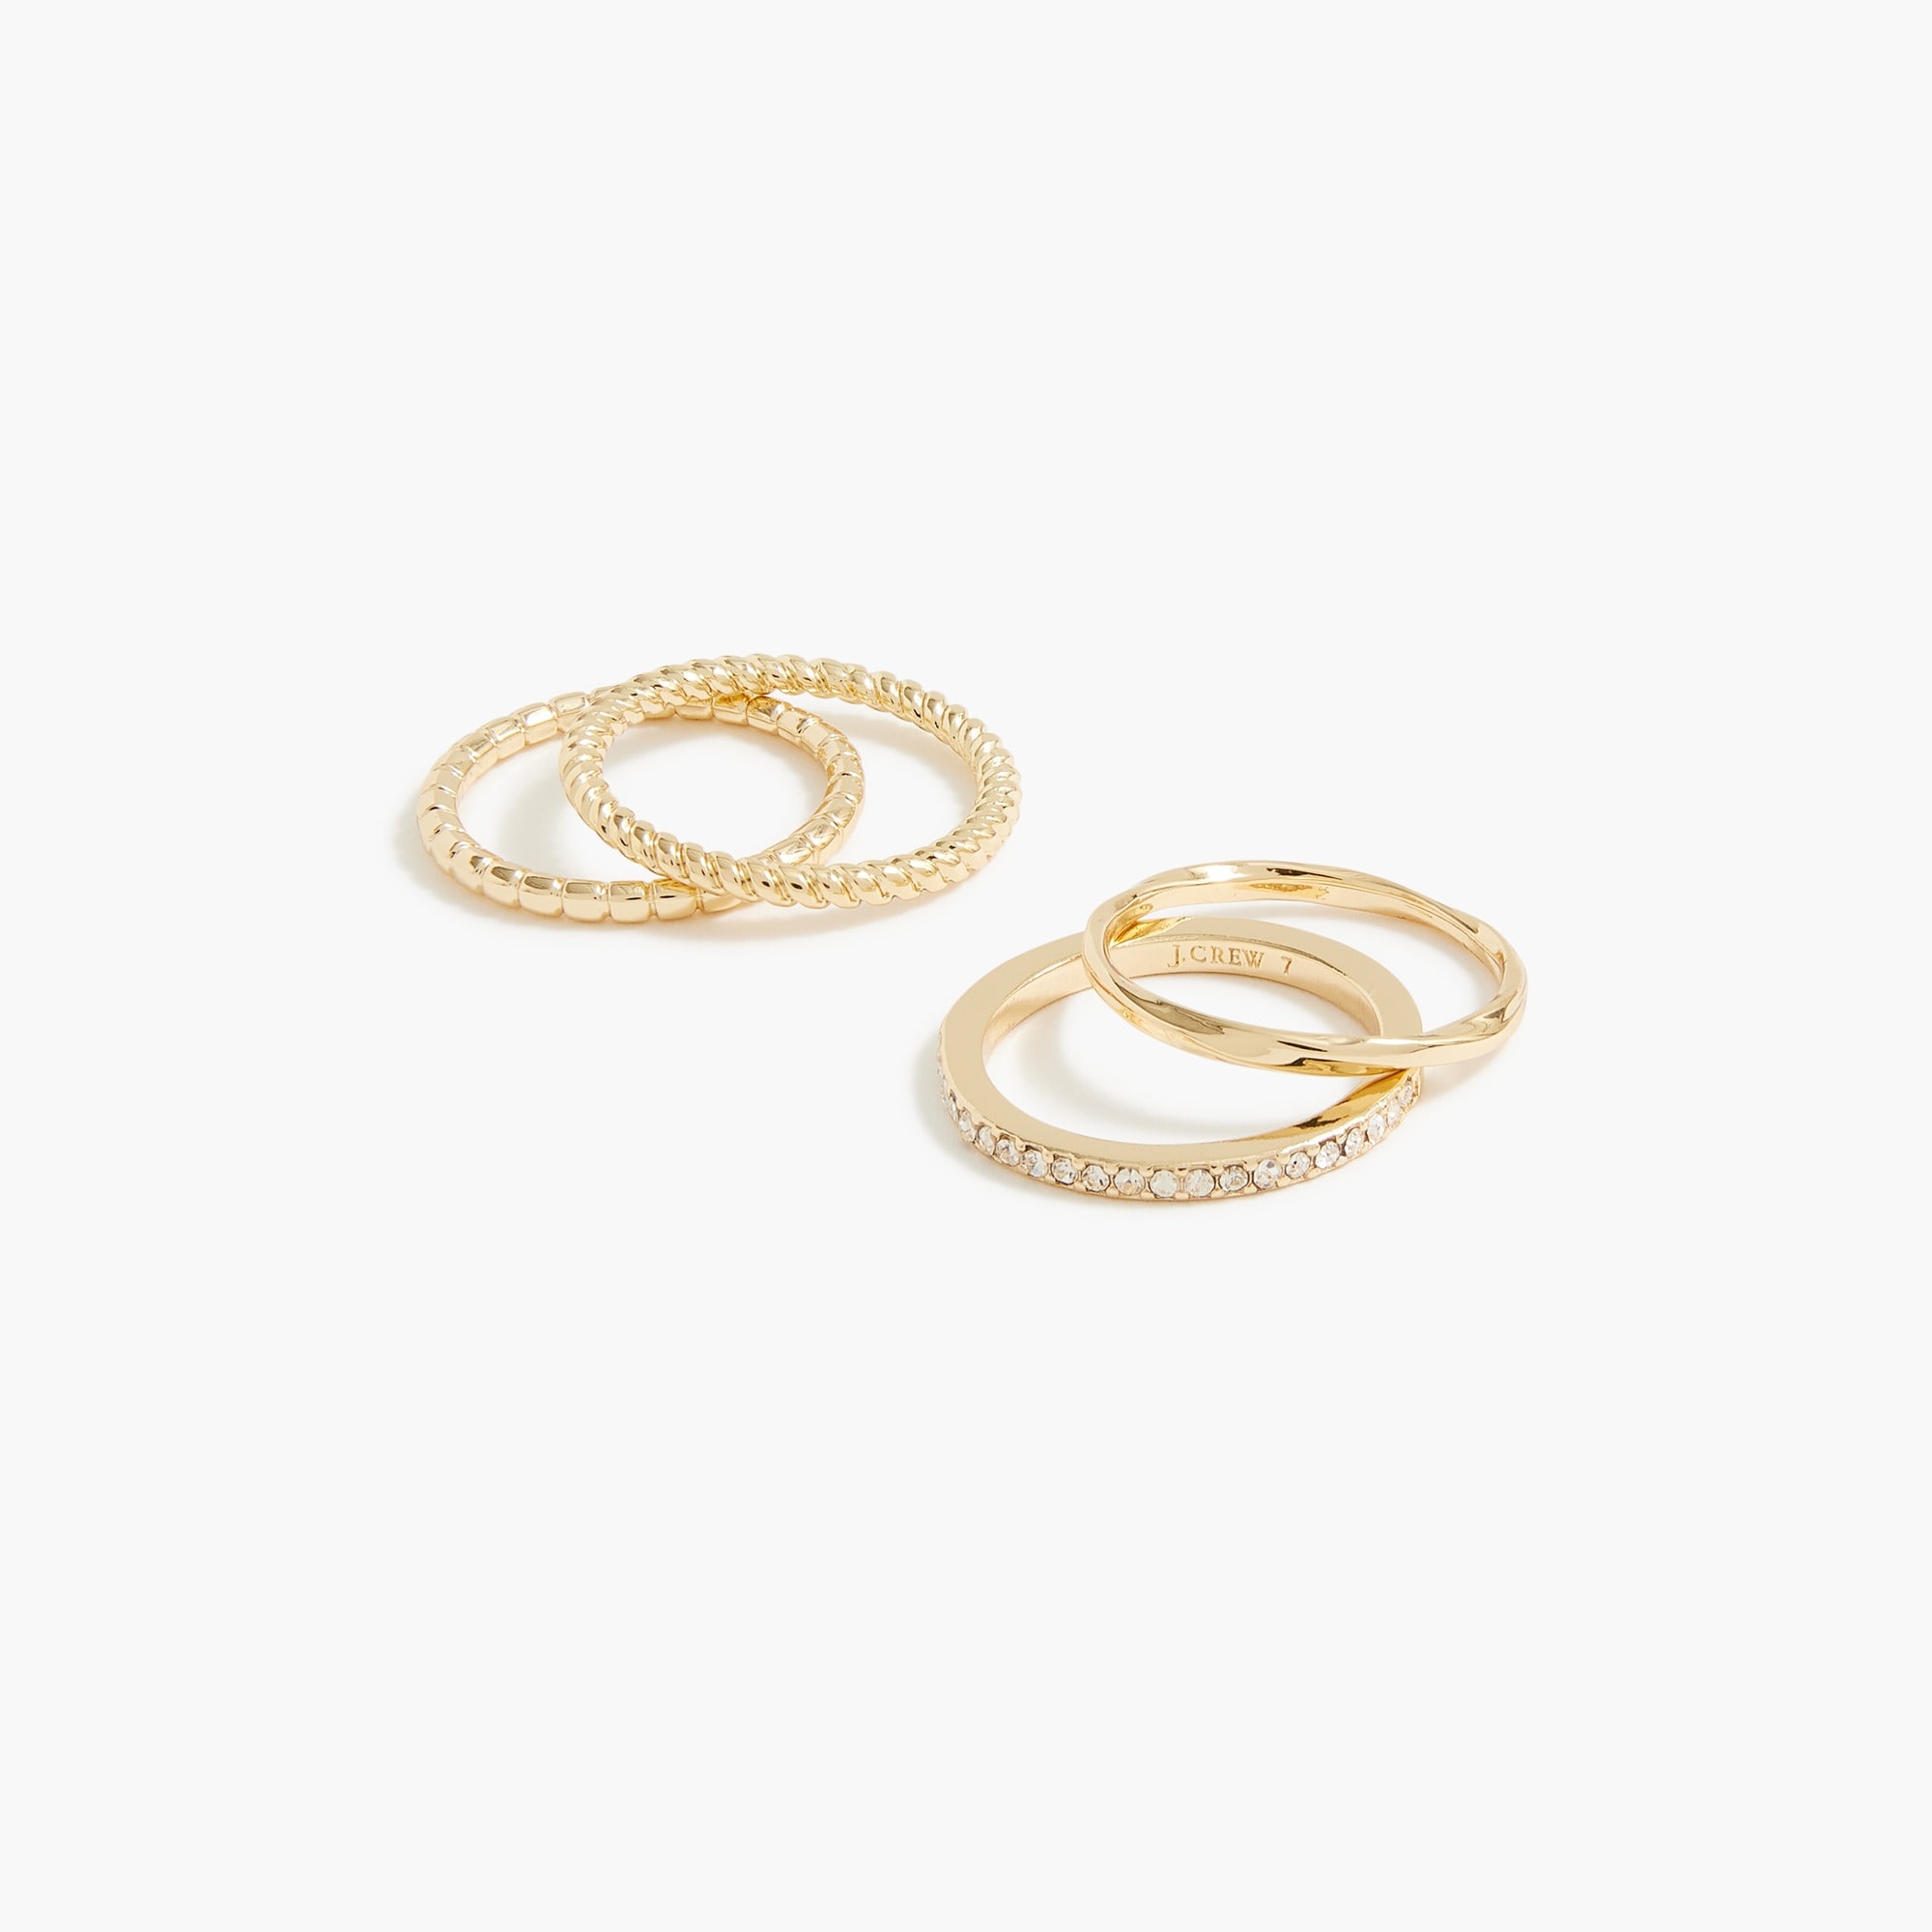  Gold stacking rings set-of-four